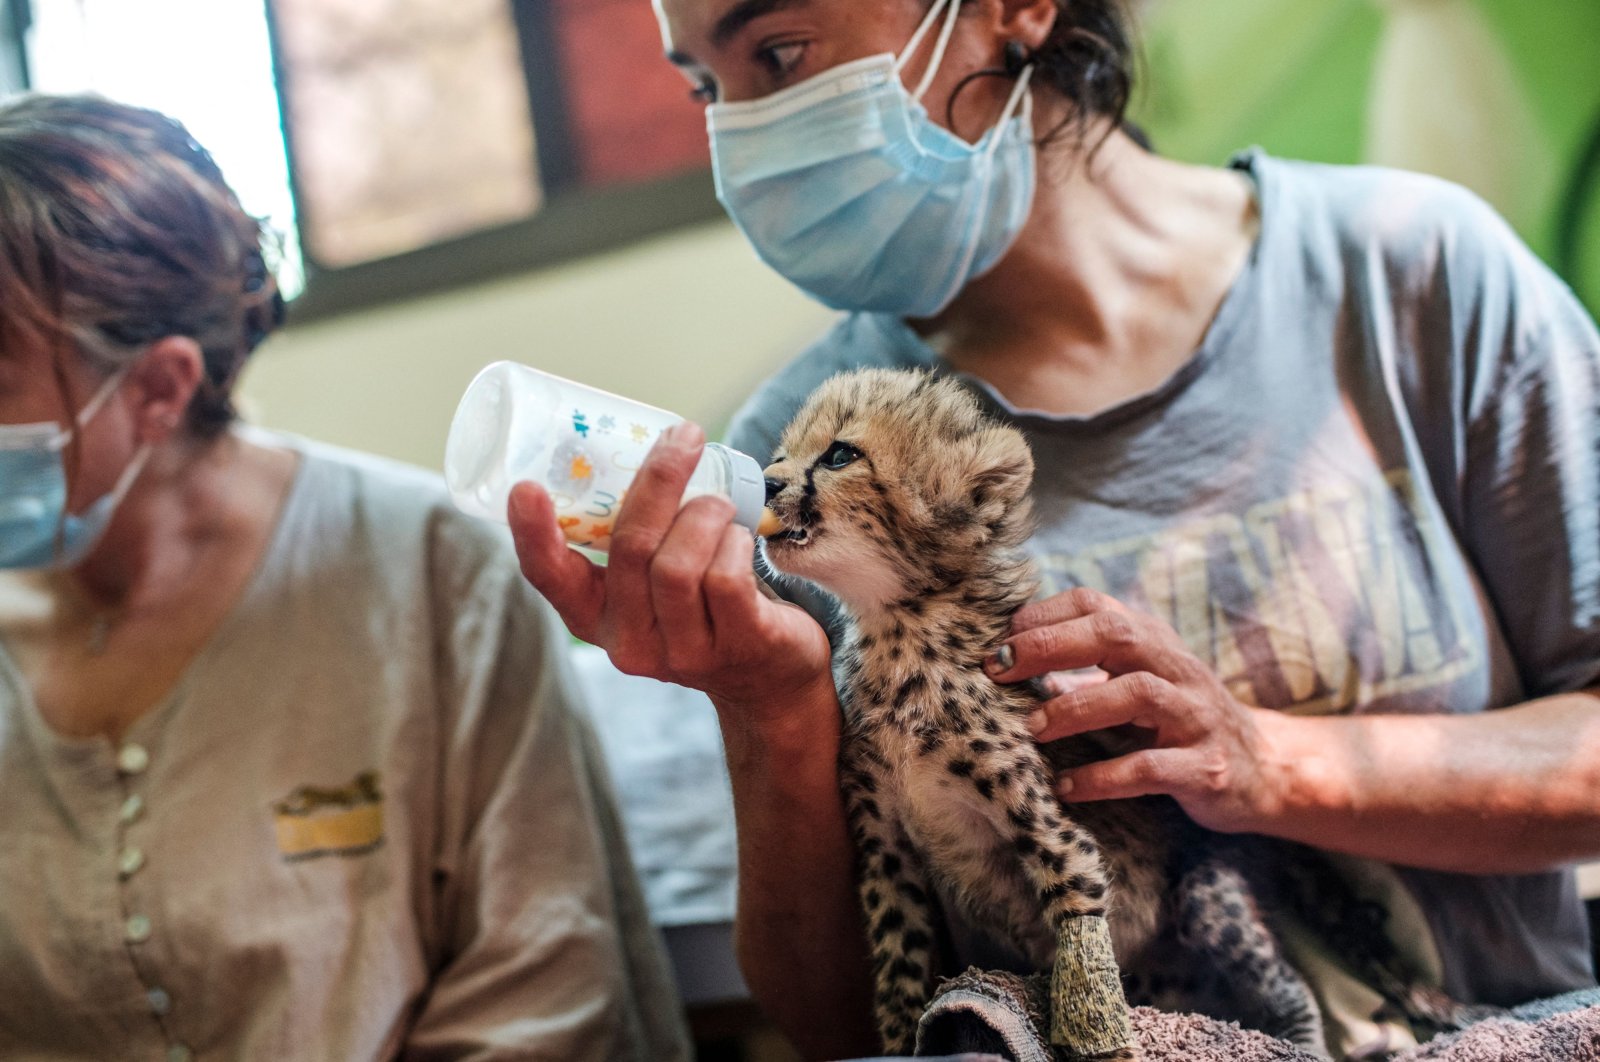 A member of the Cheetah Conservation Fund feeds a baby cheetah in one of the organization's facilities in Hargeisa, Somaliland, on Sep. 17, 2021. (AFP Photo)